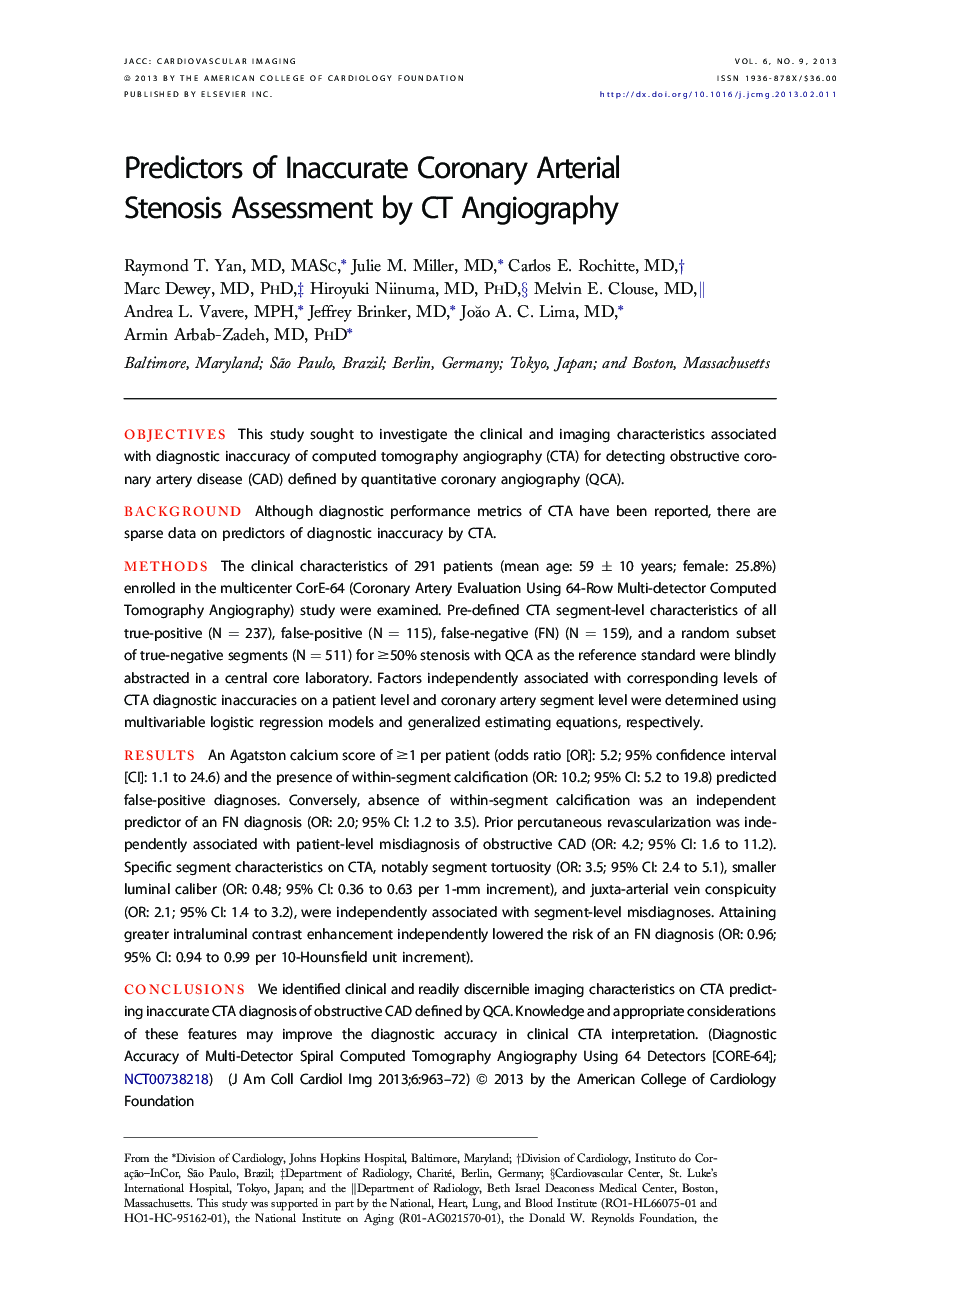 Predictors of Inaccurate Coronary Arterial Stenosis Assessment by CT Angiography 